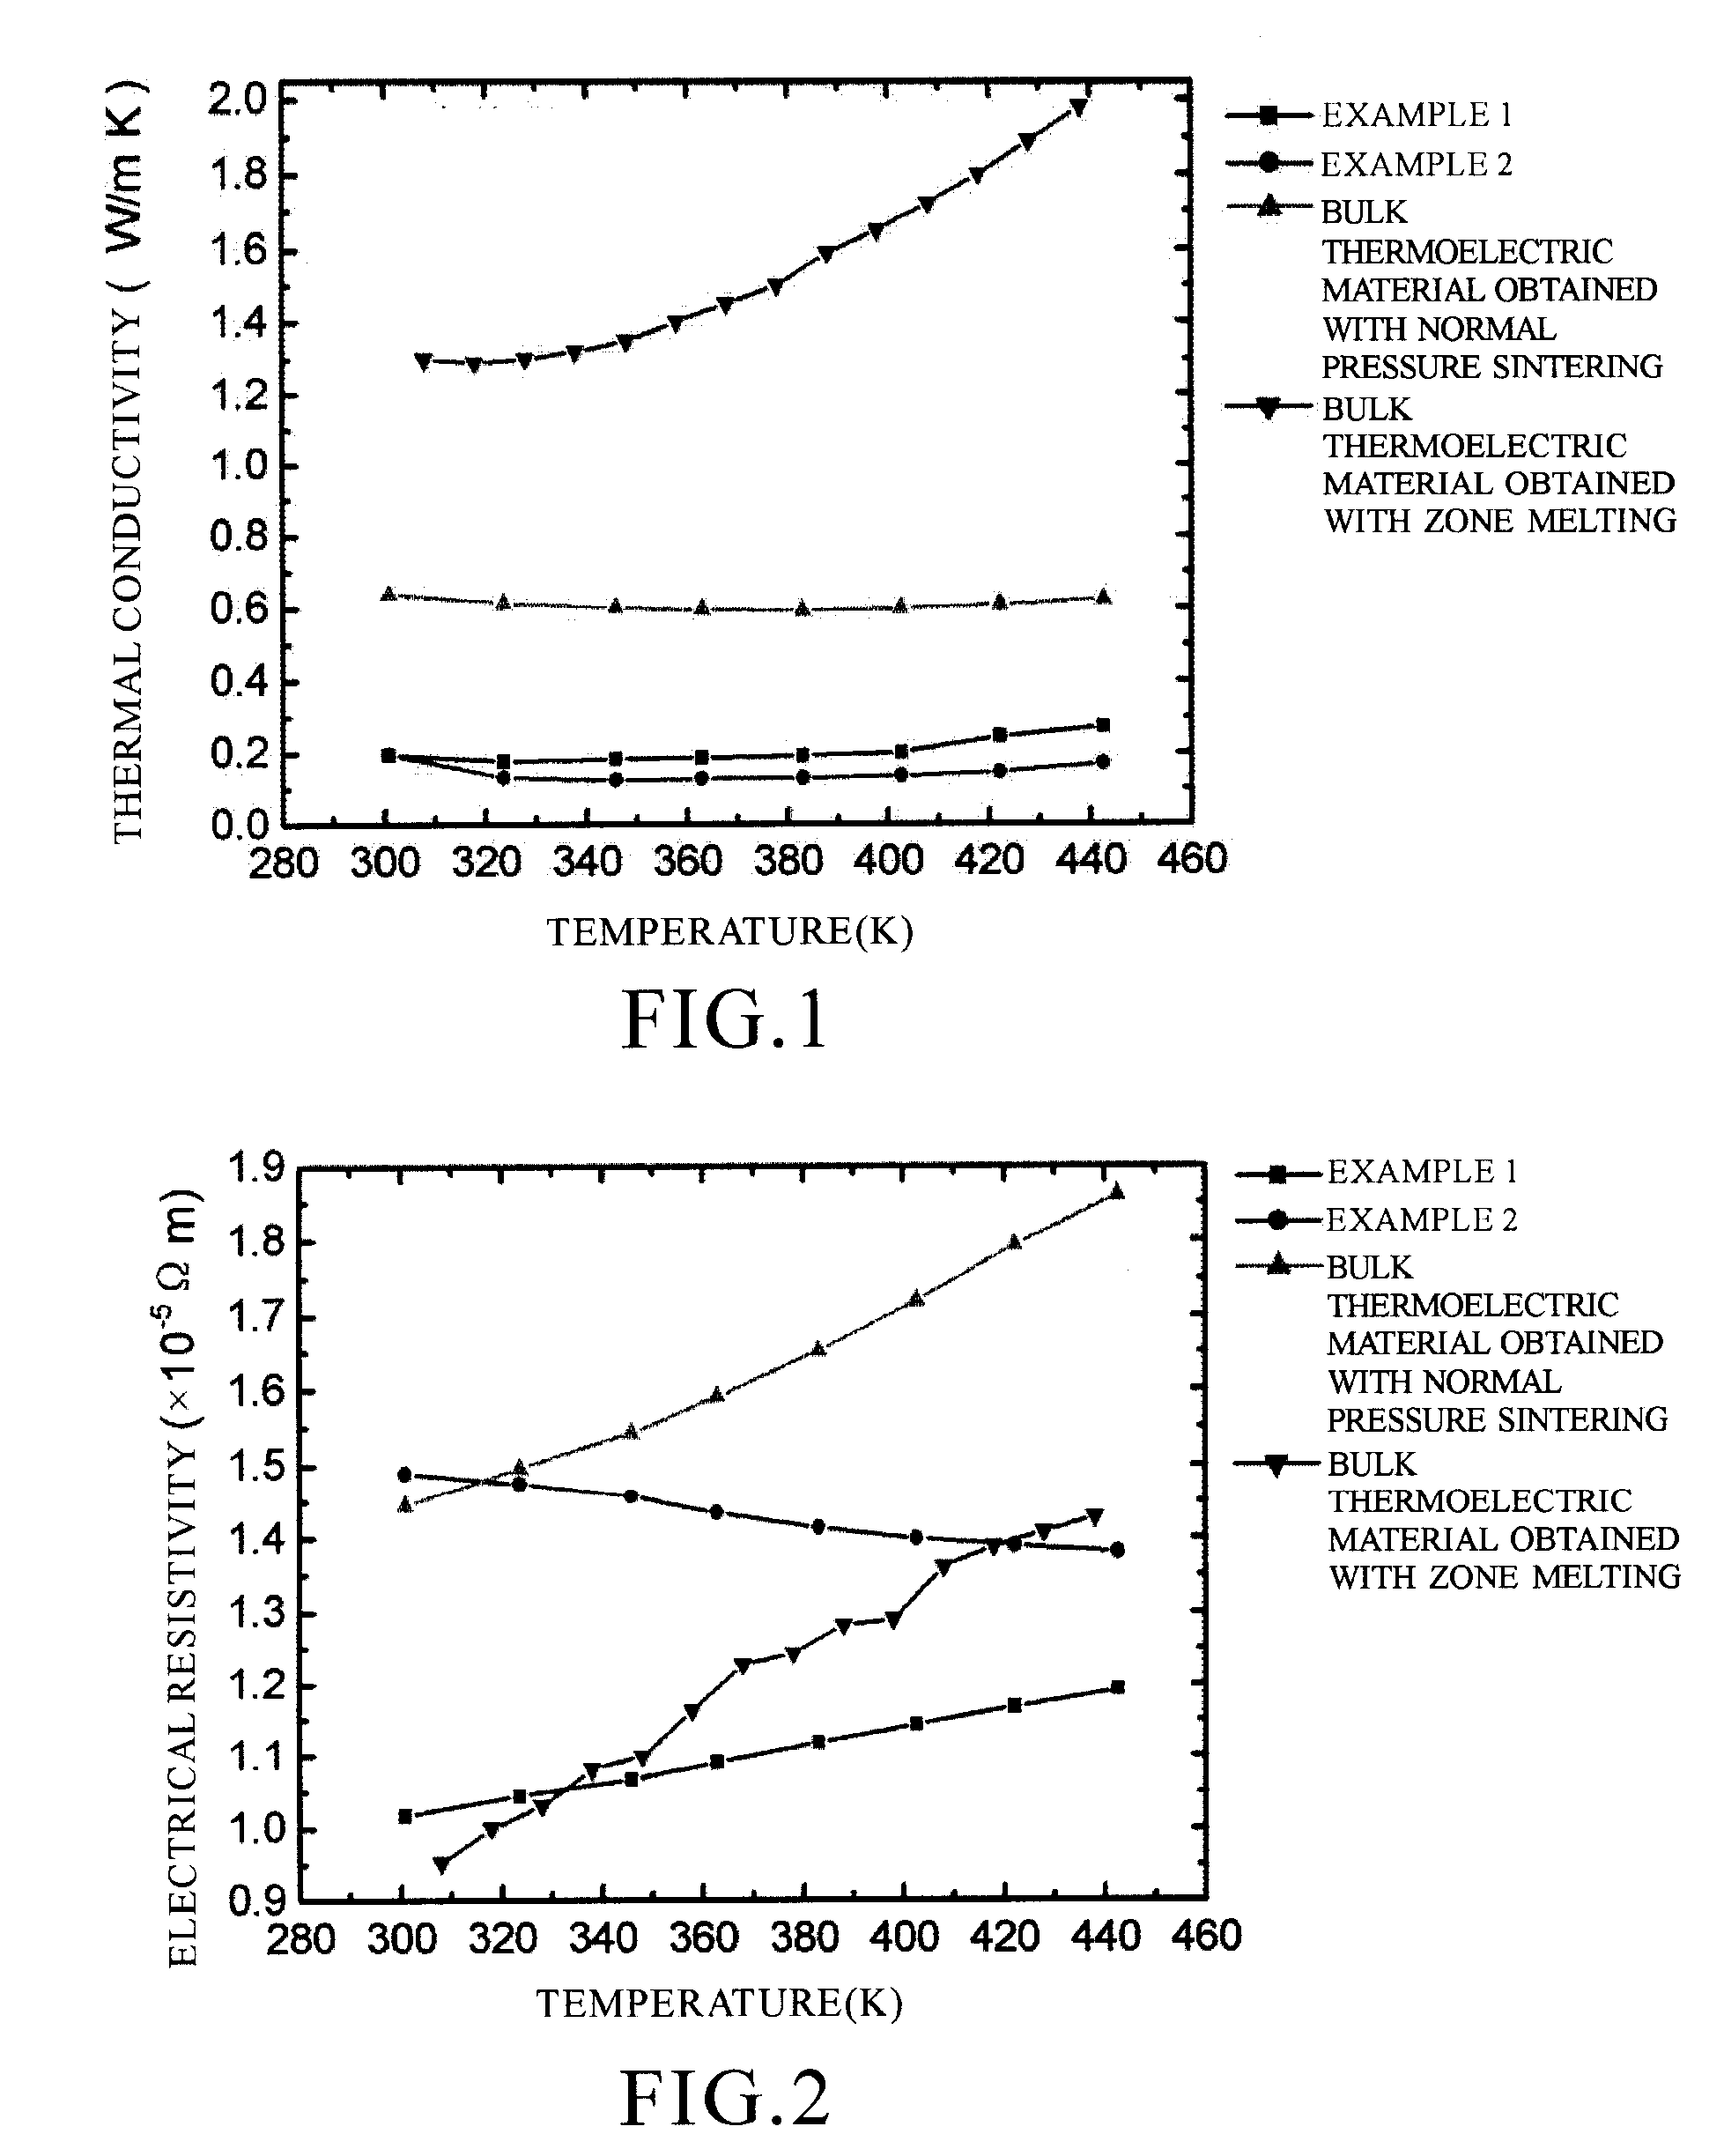 Fabrication of High Performance Densified Nanocrystalline Bulk Thermoelectric Materials Using High Pressure Sintering Technique